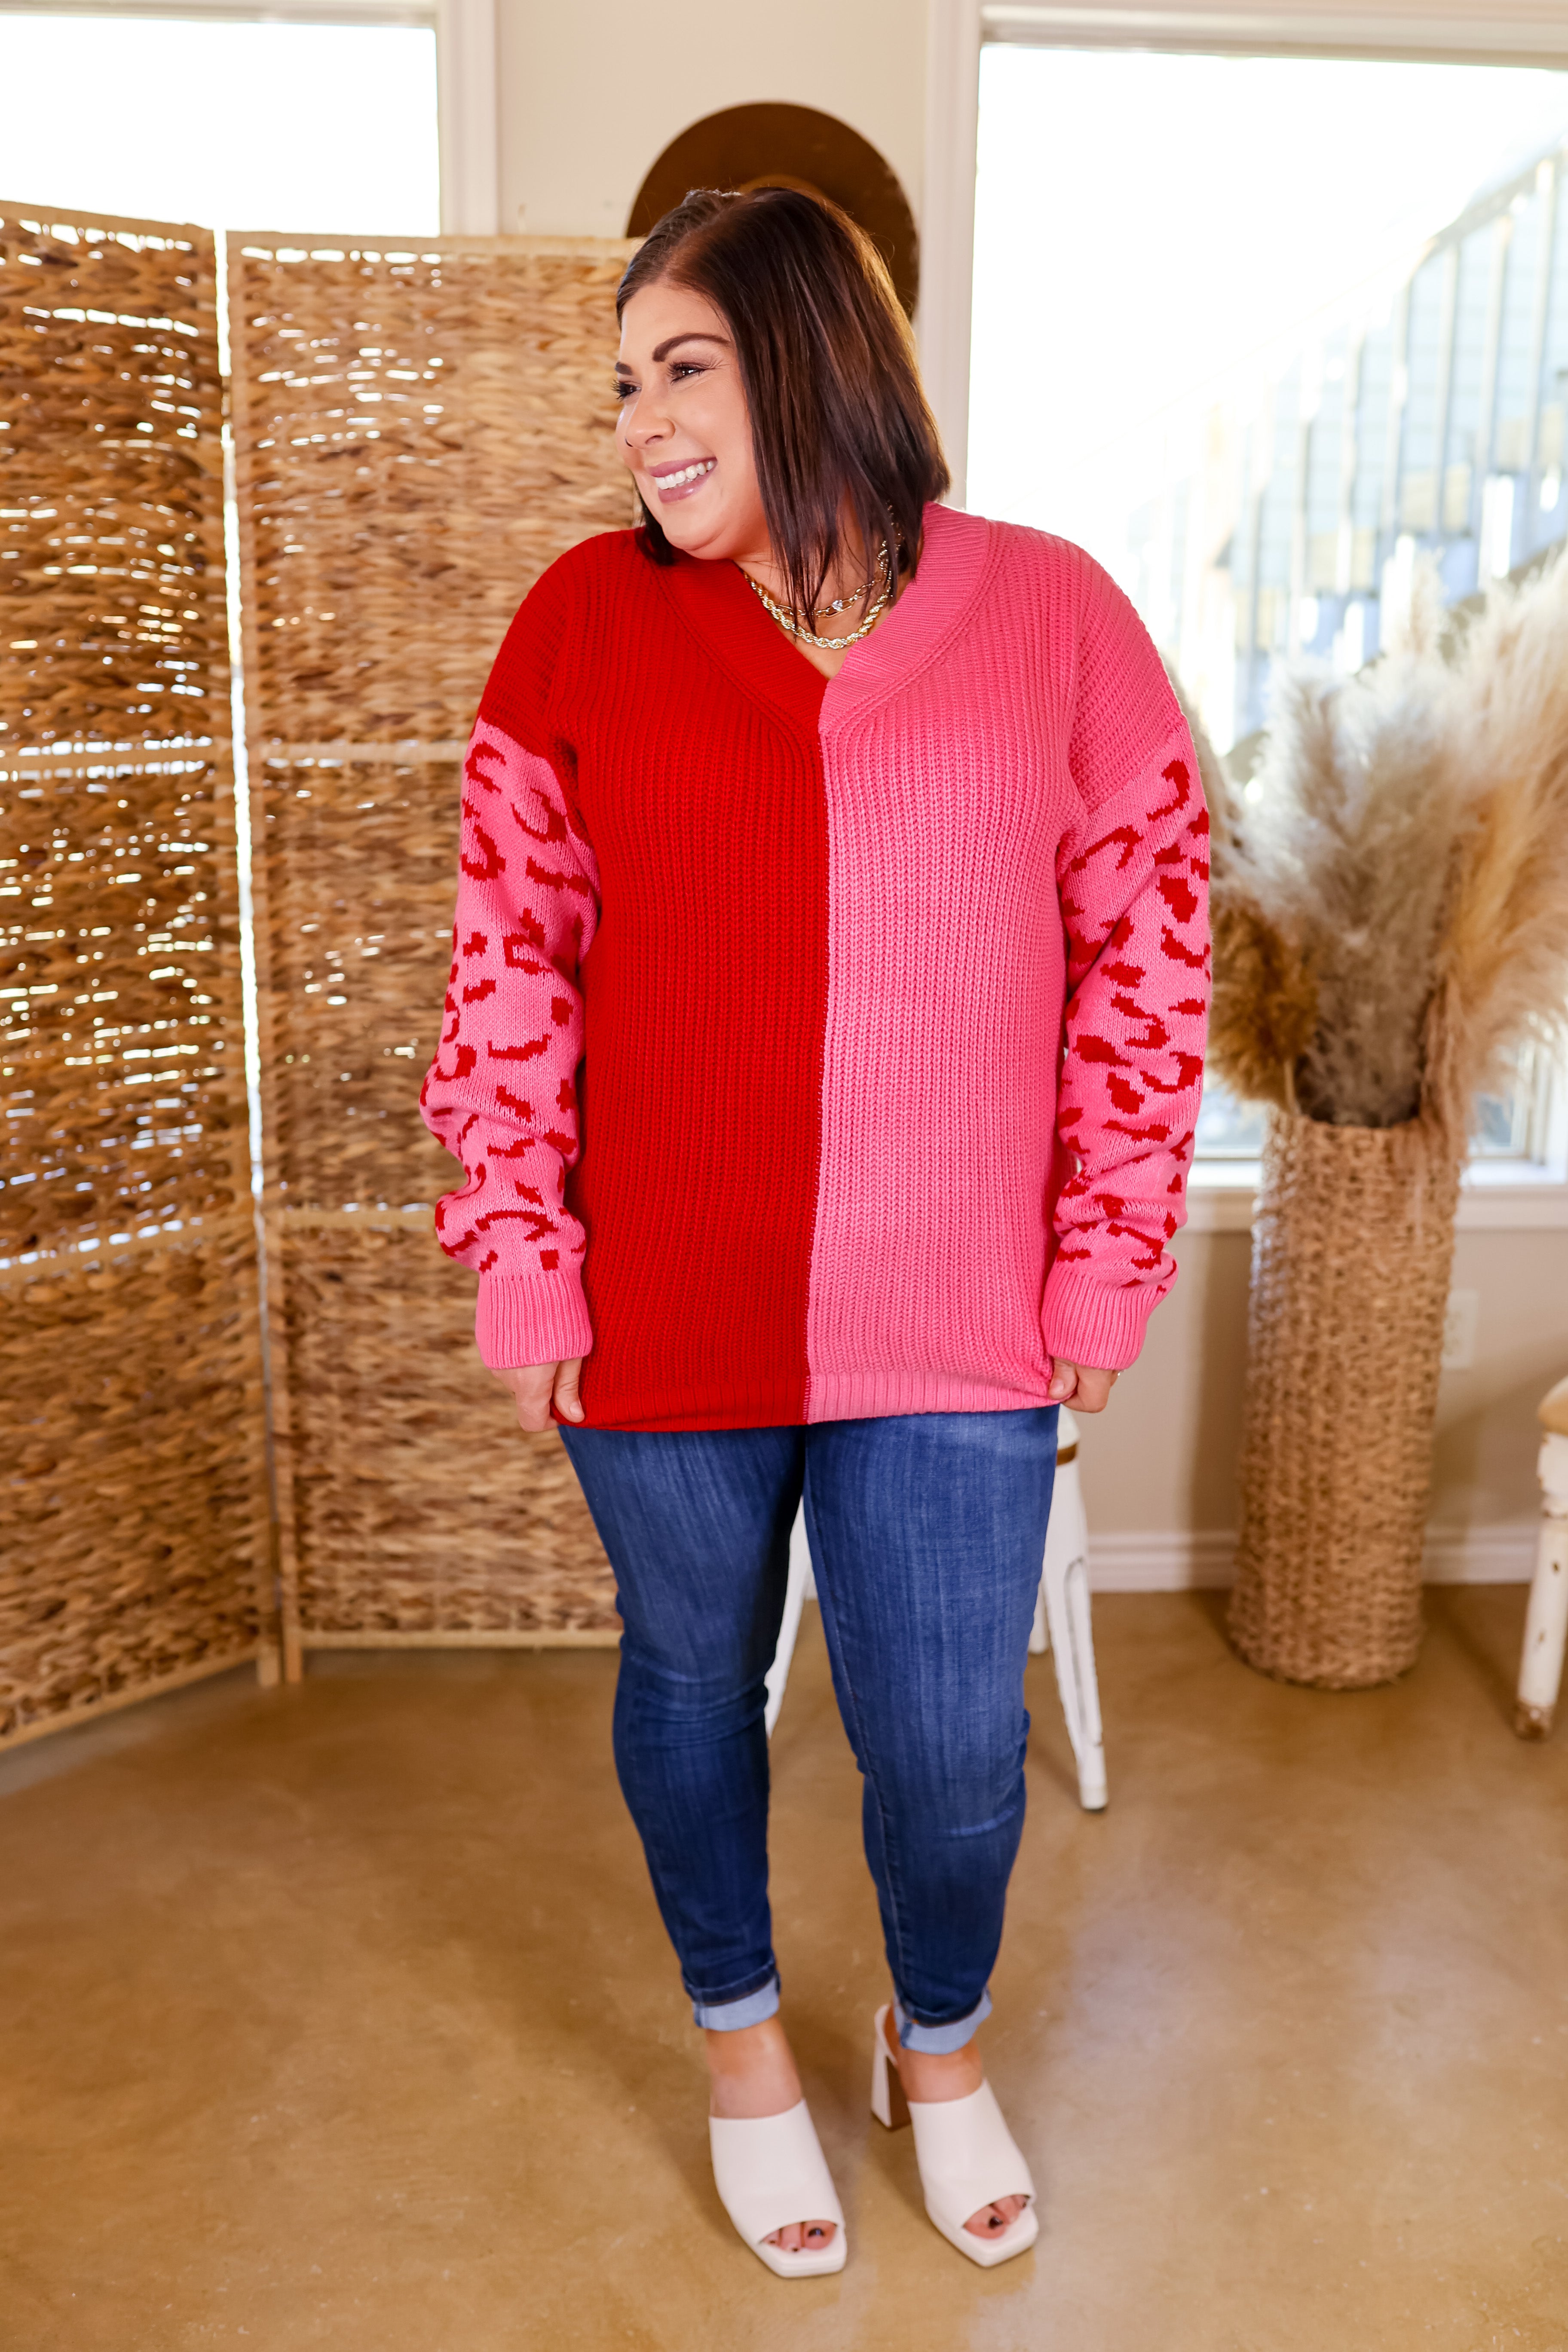 Changing Seasons Leopard Print Long Sleeve Sweater in Pink and Red - Giddy Up Glamour Boutique